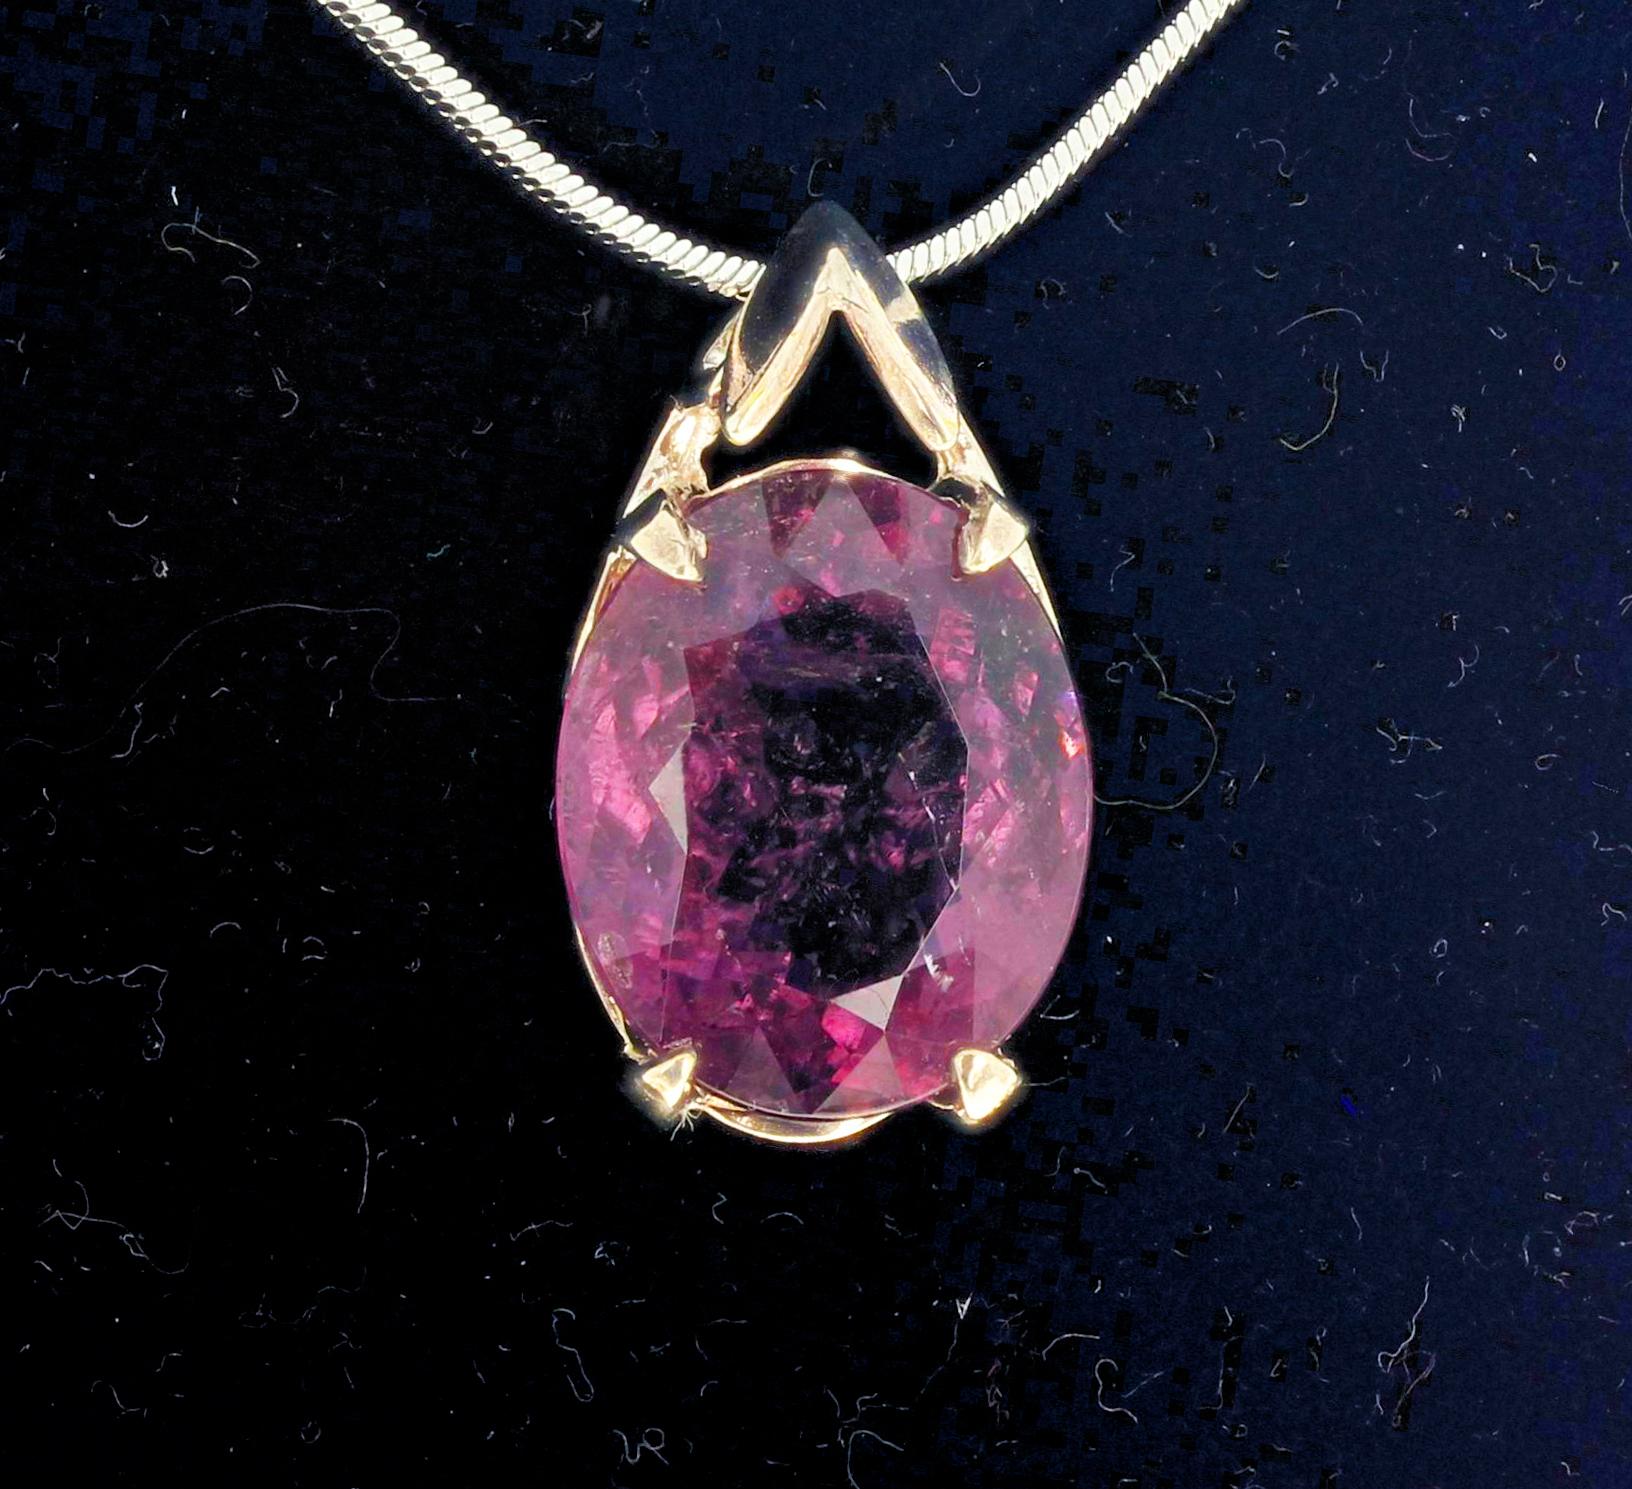 This glistening oval cut natural purpley-pinky 16.5 carat Tourmaline is set in a Sterling  Silver pendant. The Tourmaline gemstone is 18 mm x 15 mm.   (The chain is not included).